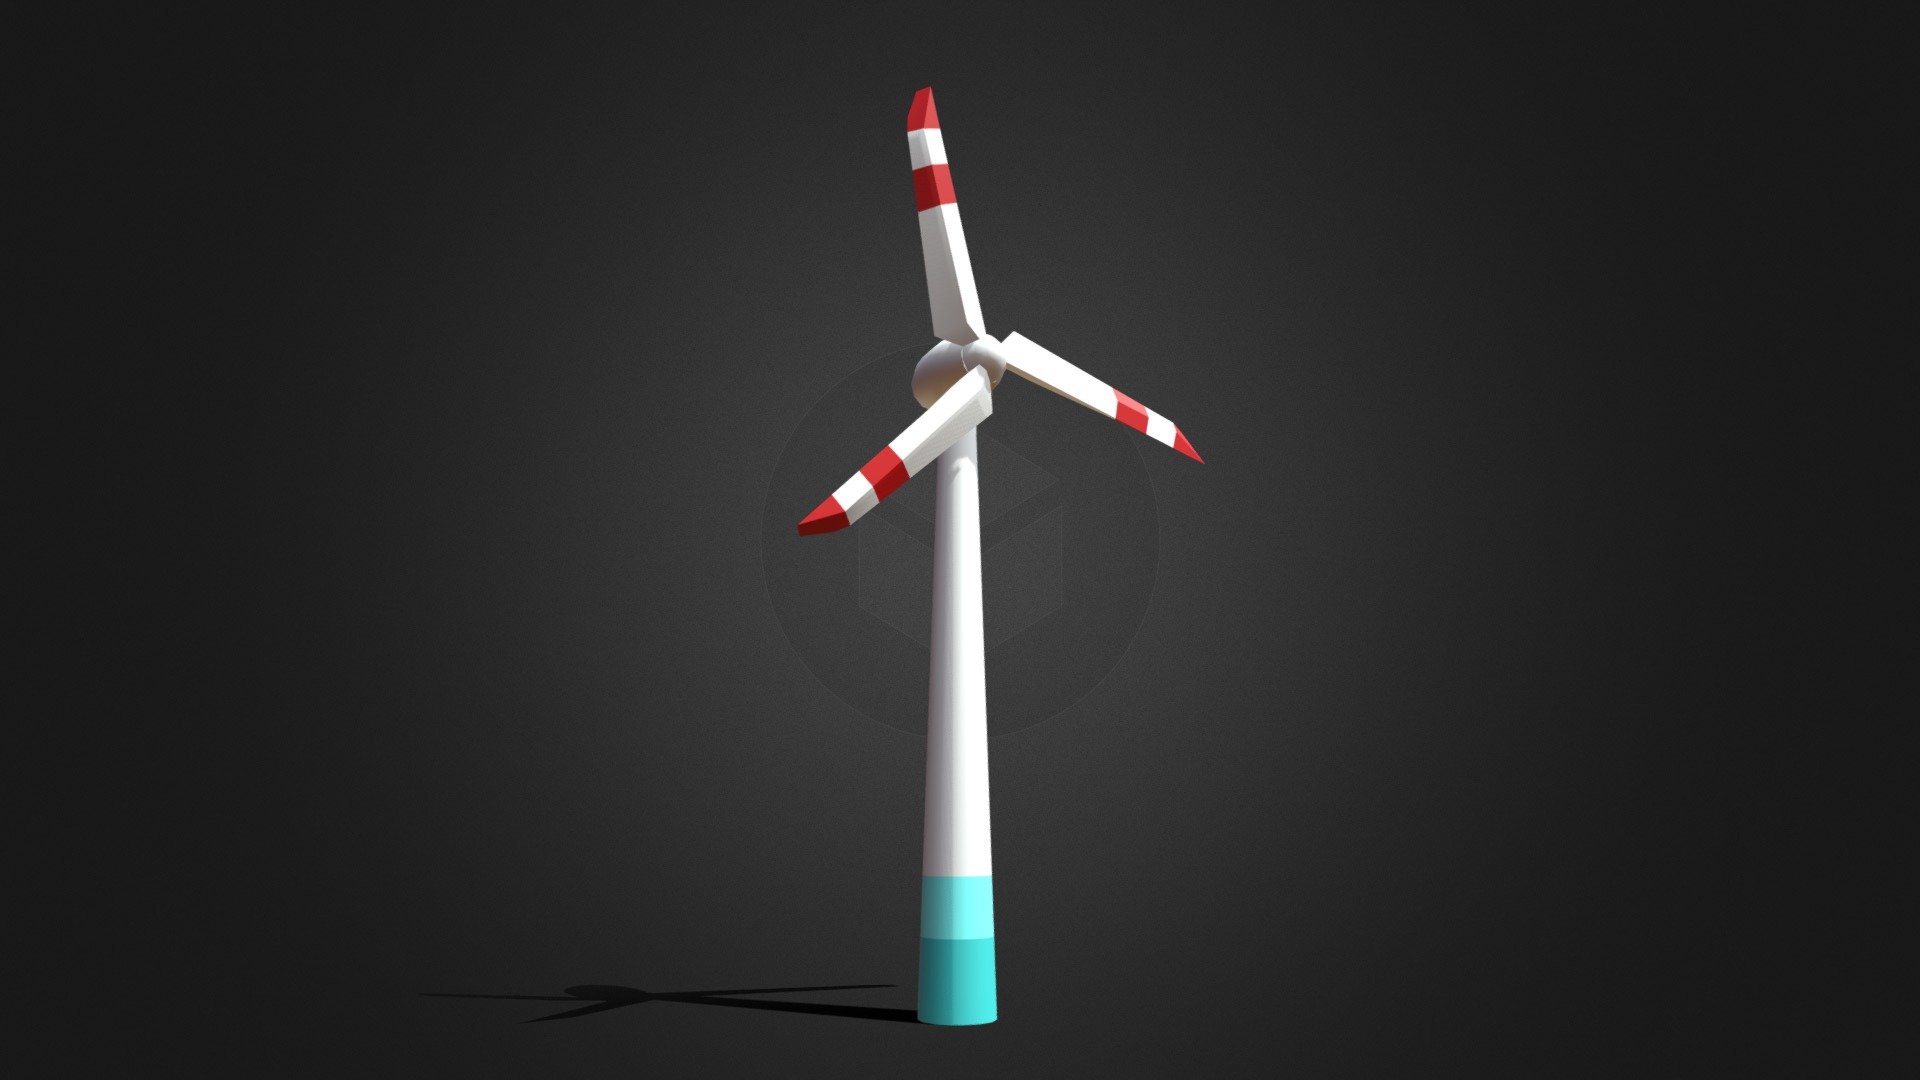 This stylized low poly wind turbine is part of the ClimateHackerz Asset Pack intended to help you explain concepts of climate change and your ideas of climate reversal, renewable energy and the circular economy.
It is animated, 1 full rotation of the turbine lasts 5 seconds at 24 frames per second.
In this stylized version the wind turbine is about 22 meters high 3d model